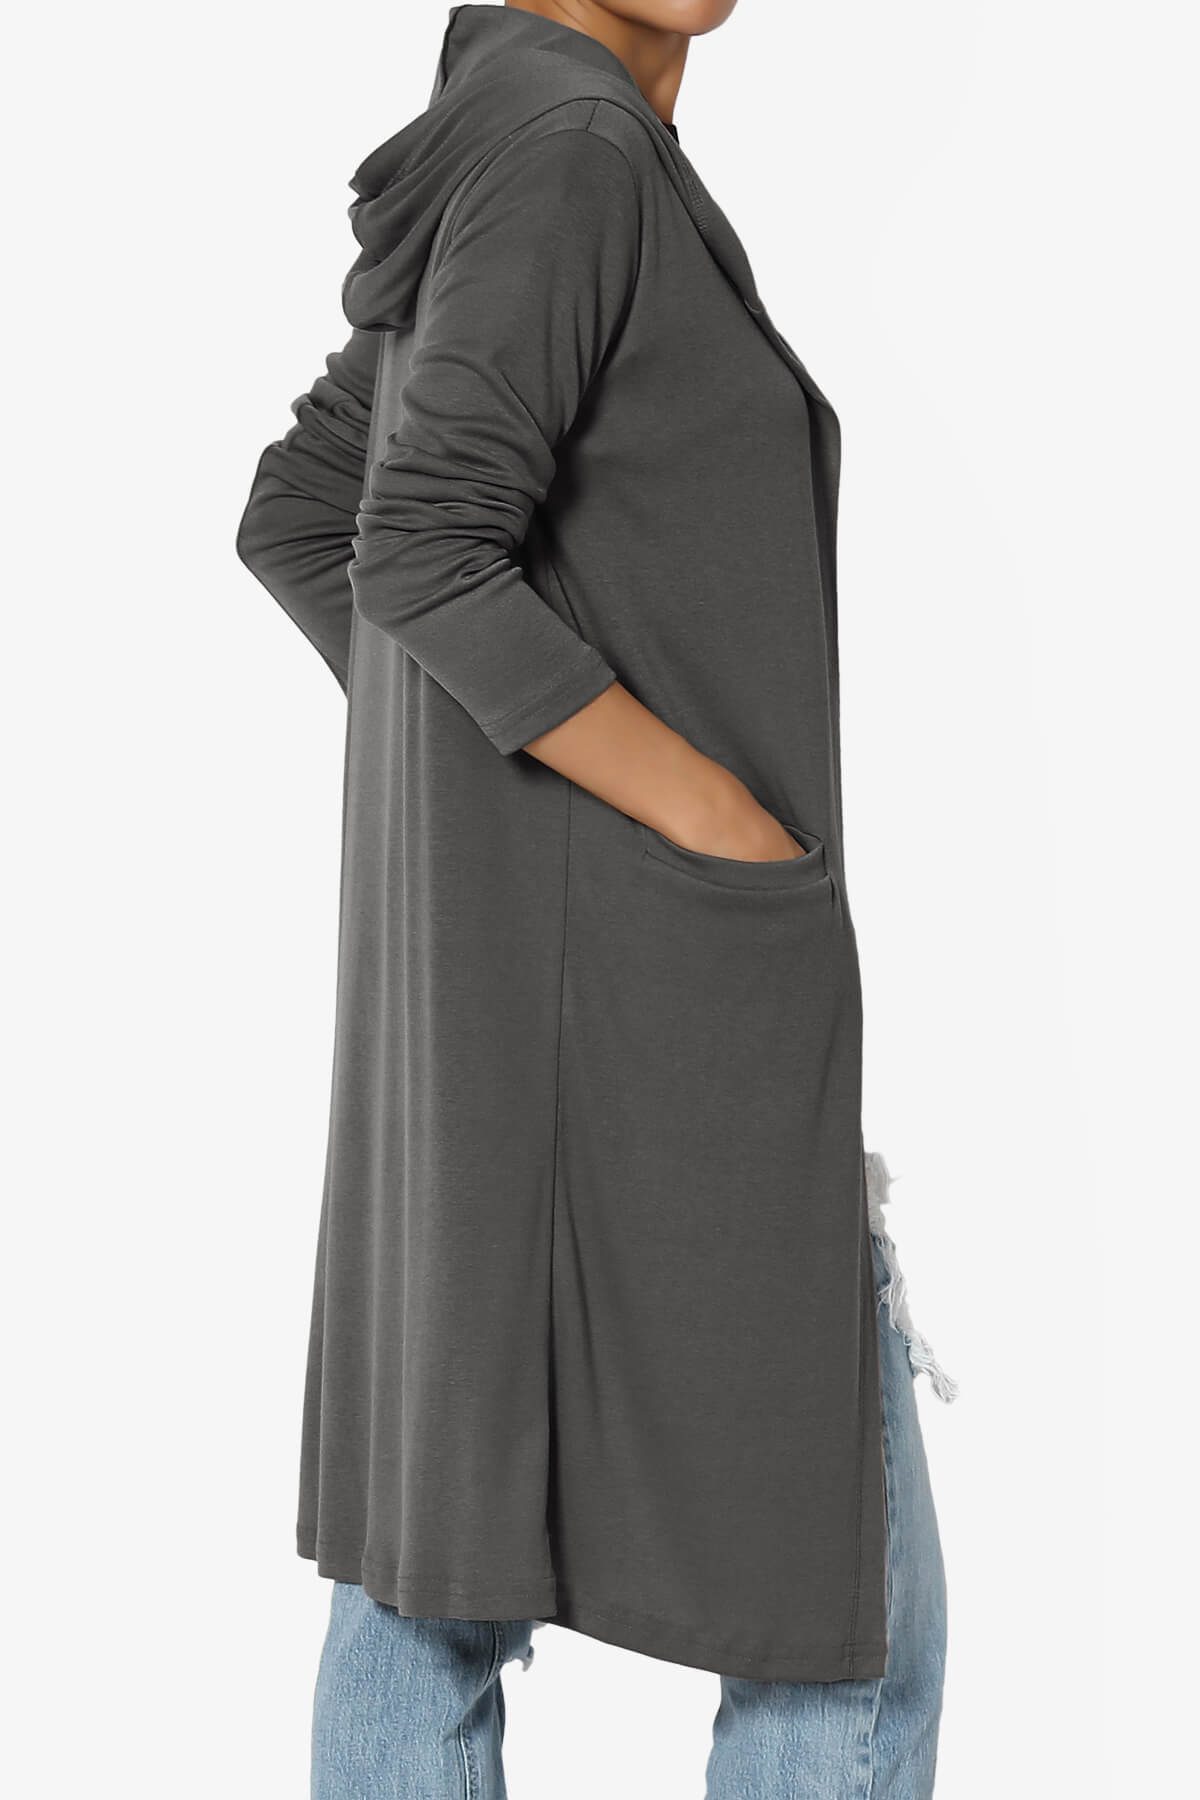 Nataly Open Front Hooded Long Cardigan CHARCOAL_4